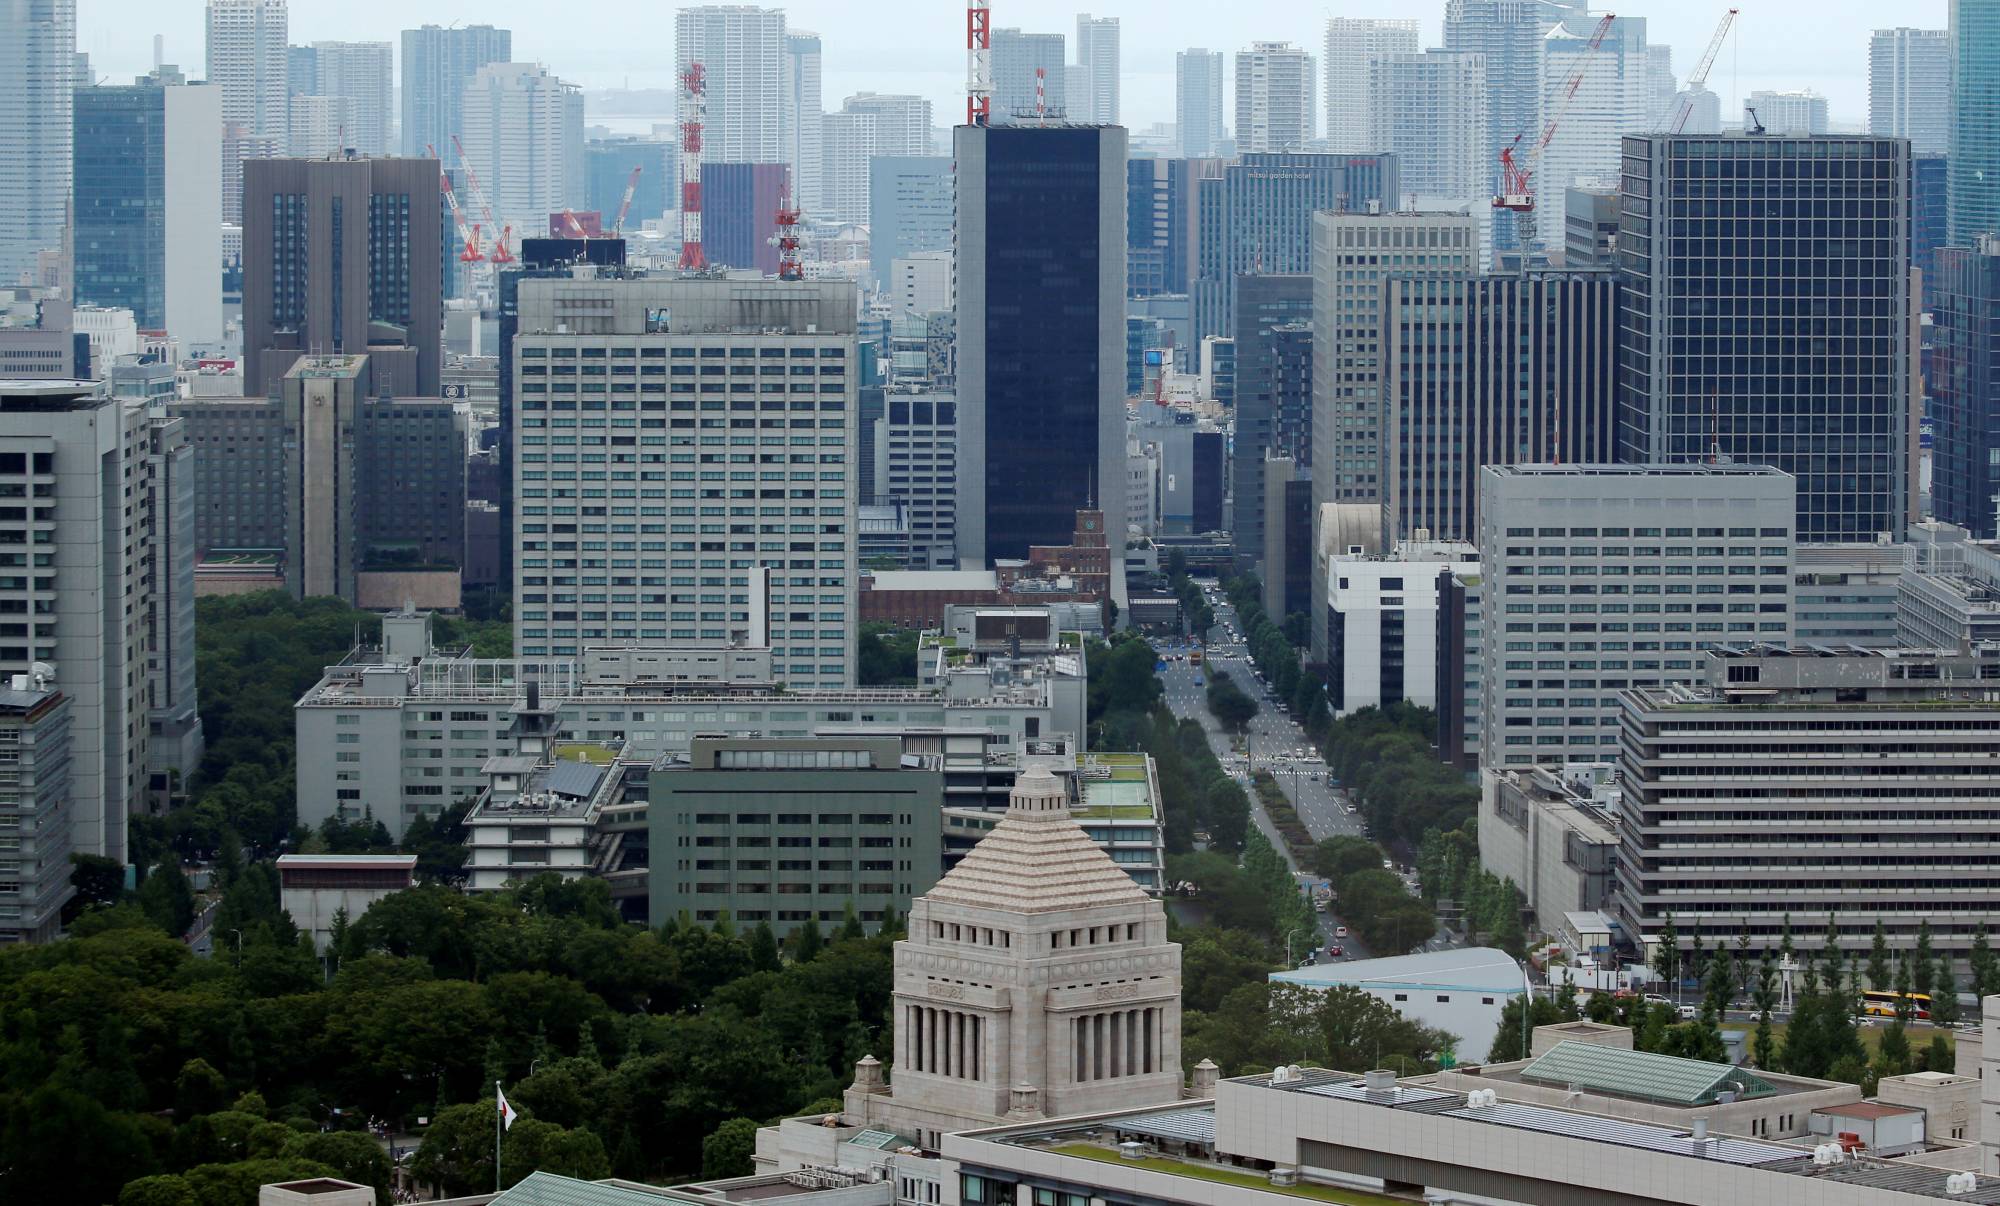 While Tokyo has made 'digital transformation' its main policy plank this year, the switch may not prove so easy as bureaucrats from different ministries still aren't able to hold teleconferences together. | REUTERS